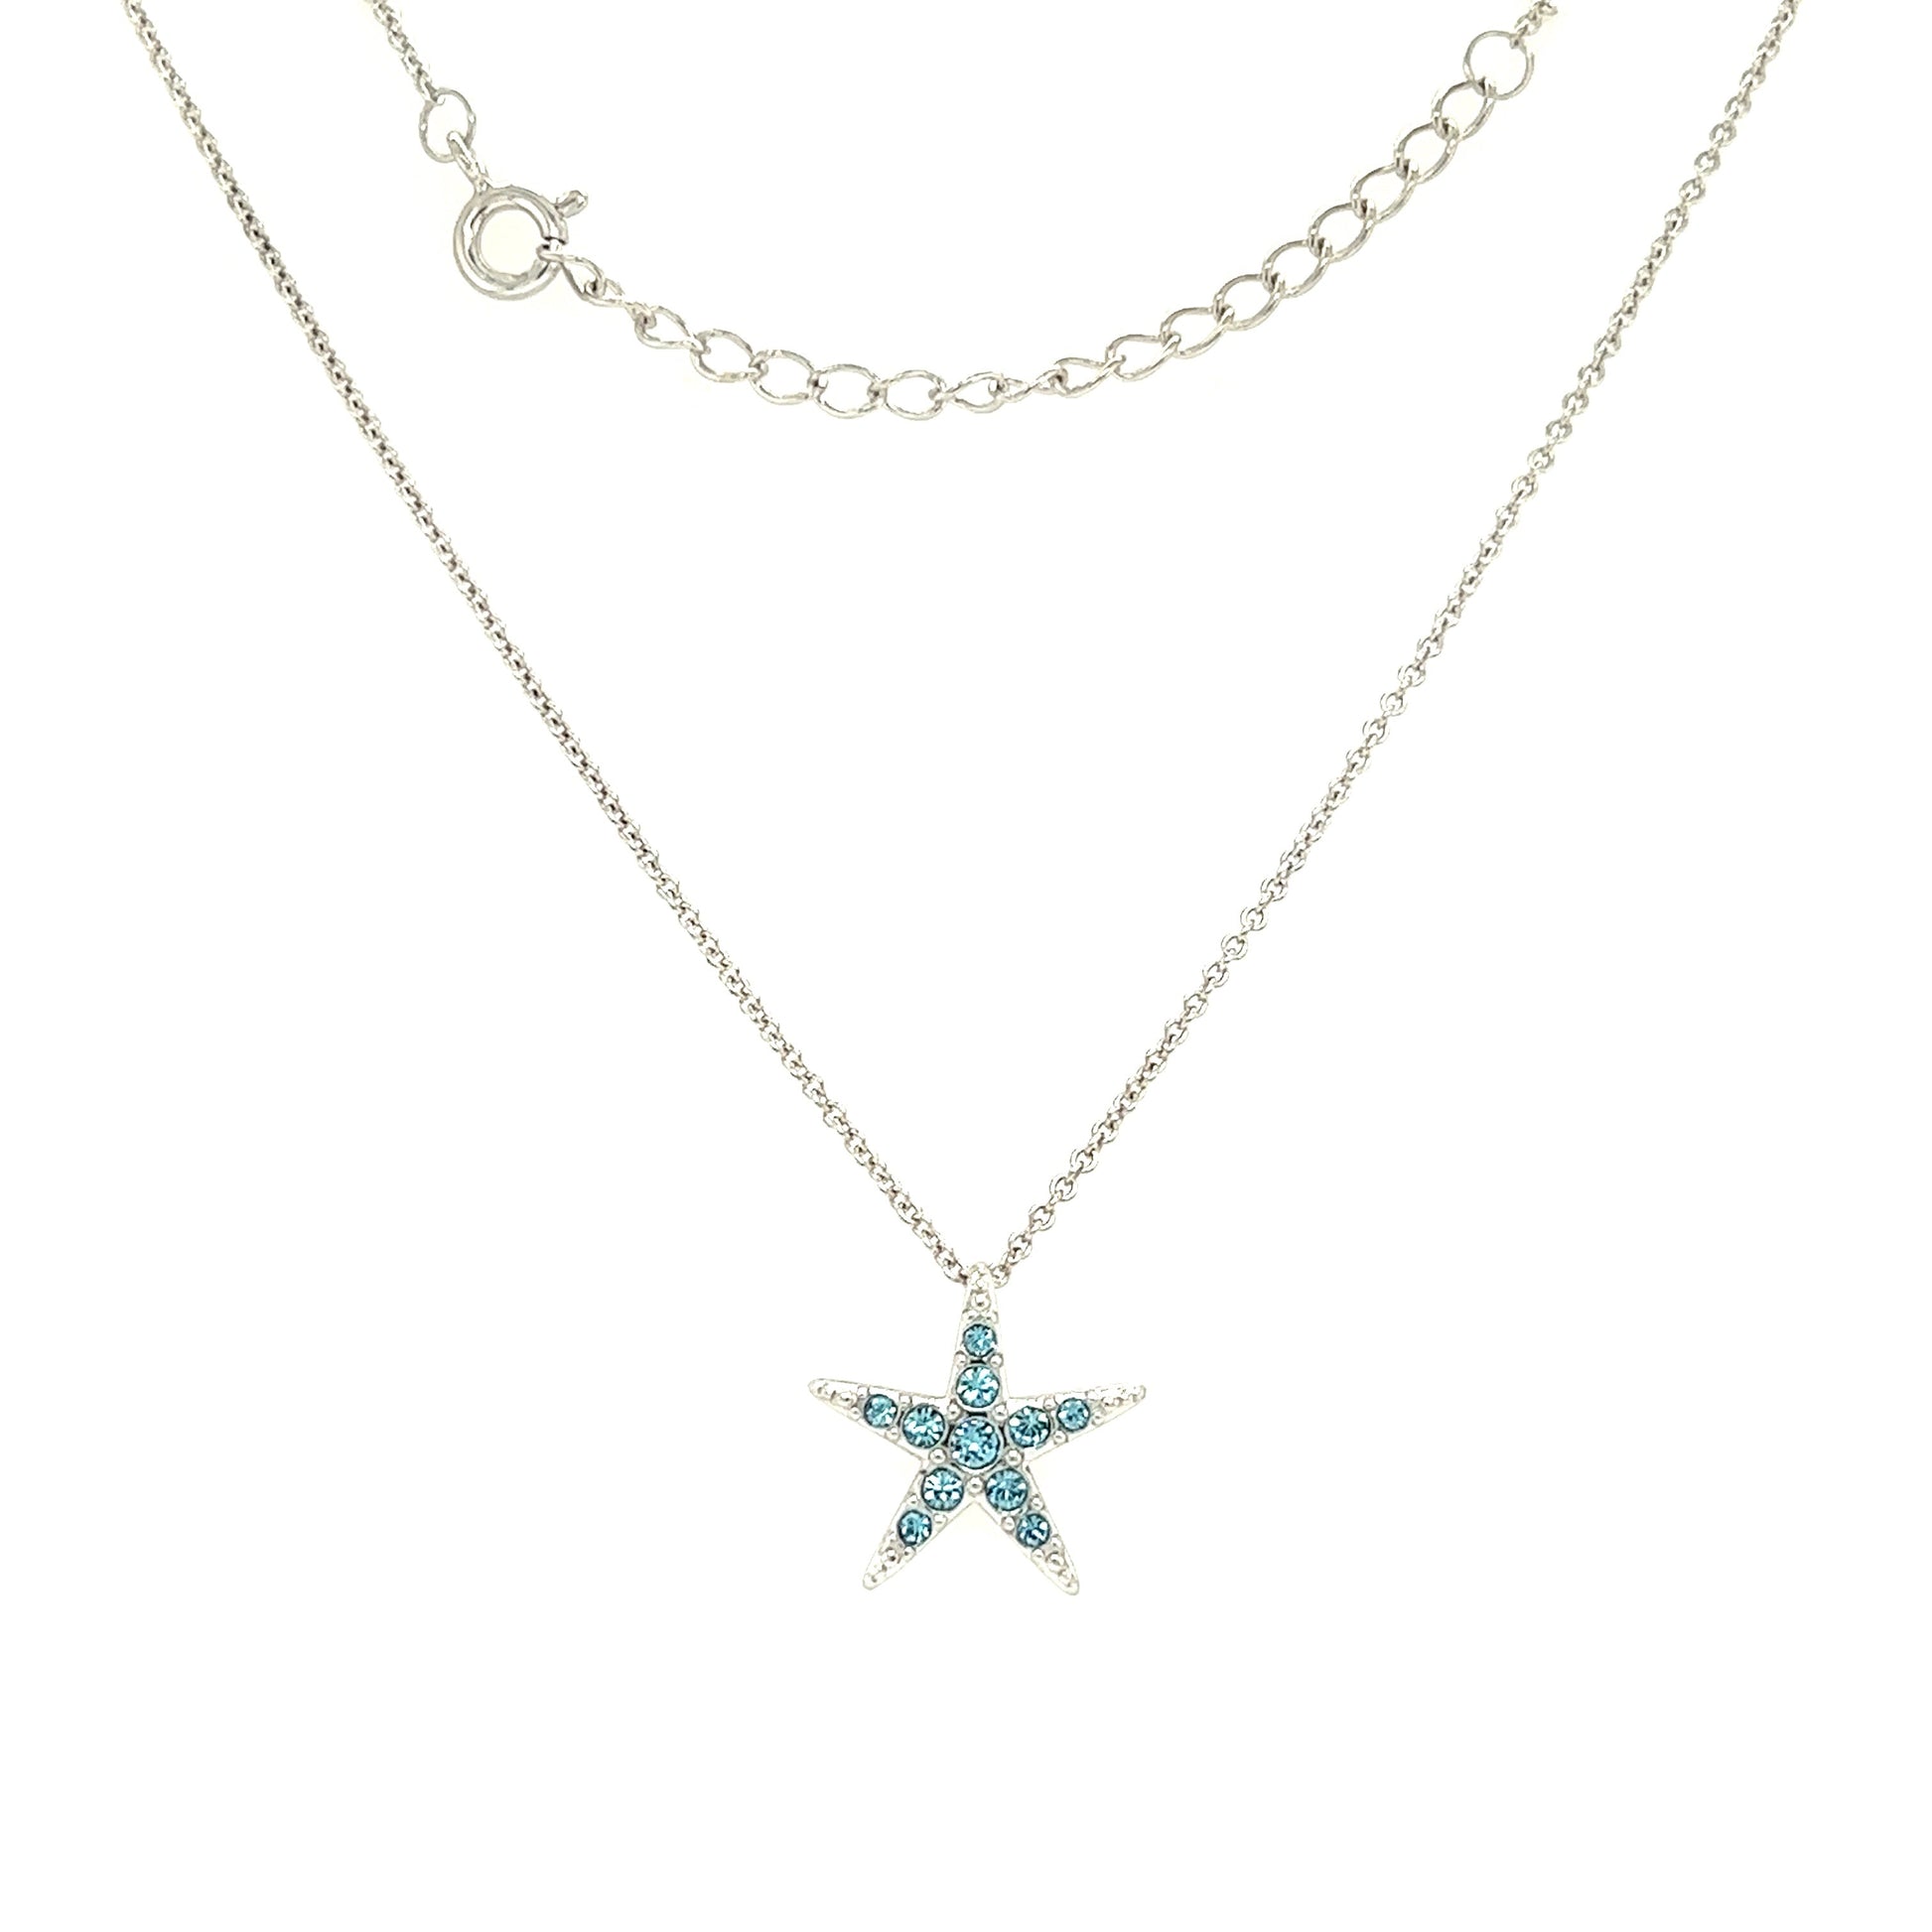 Starfish Necklace with Aqua Crystals in Sterling Silver Full Necklace Front View